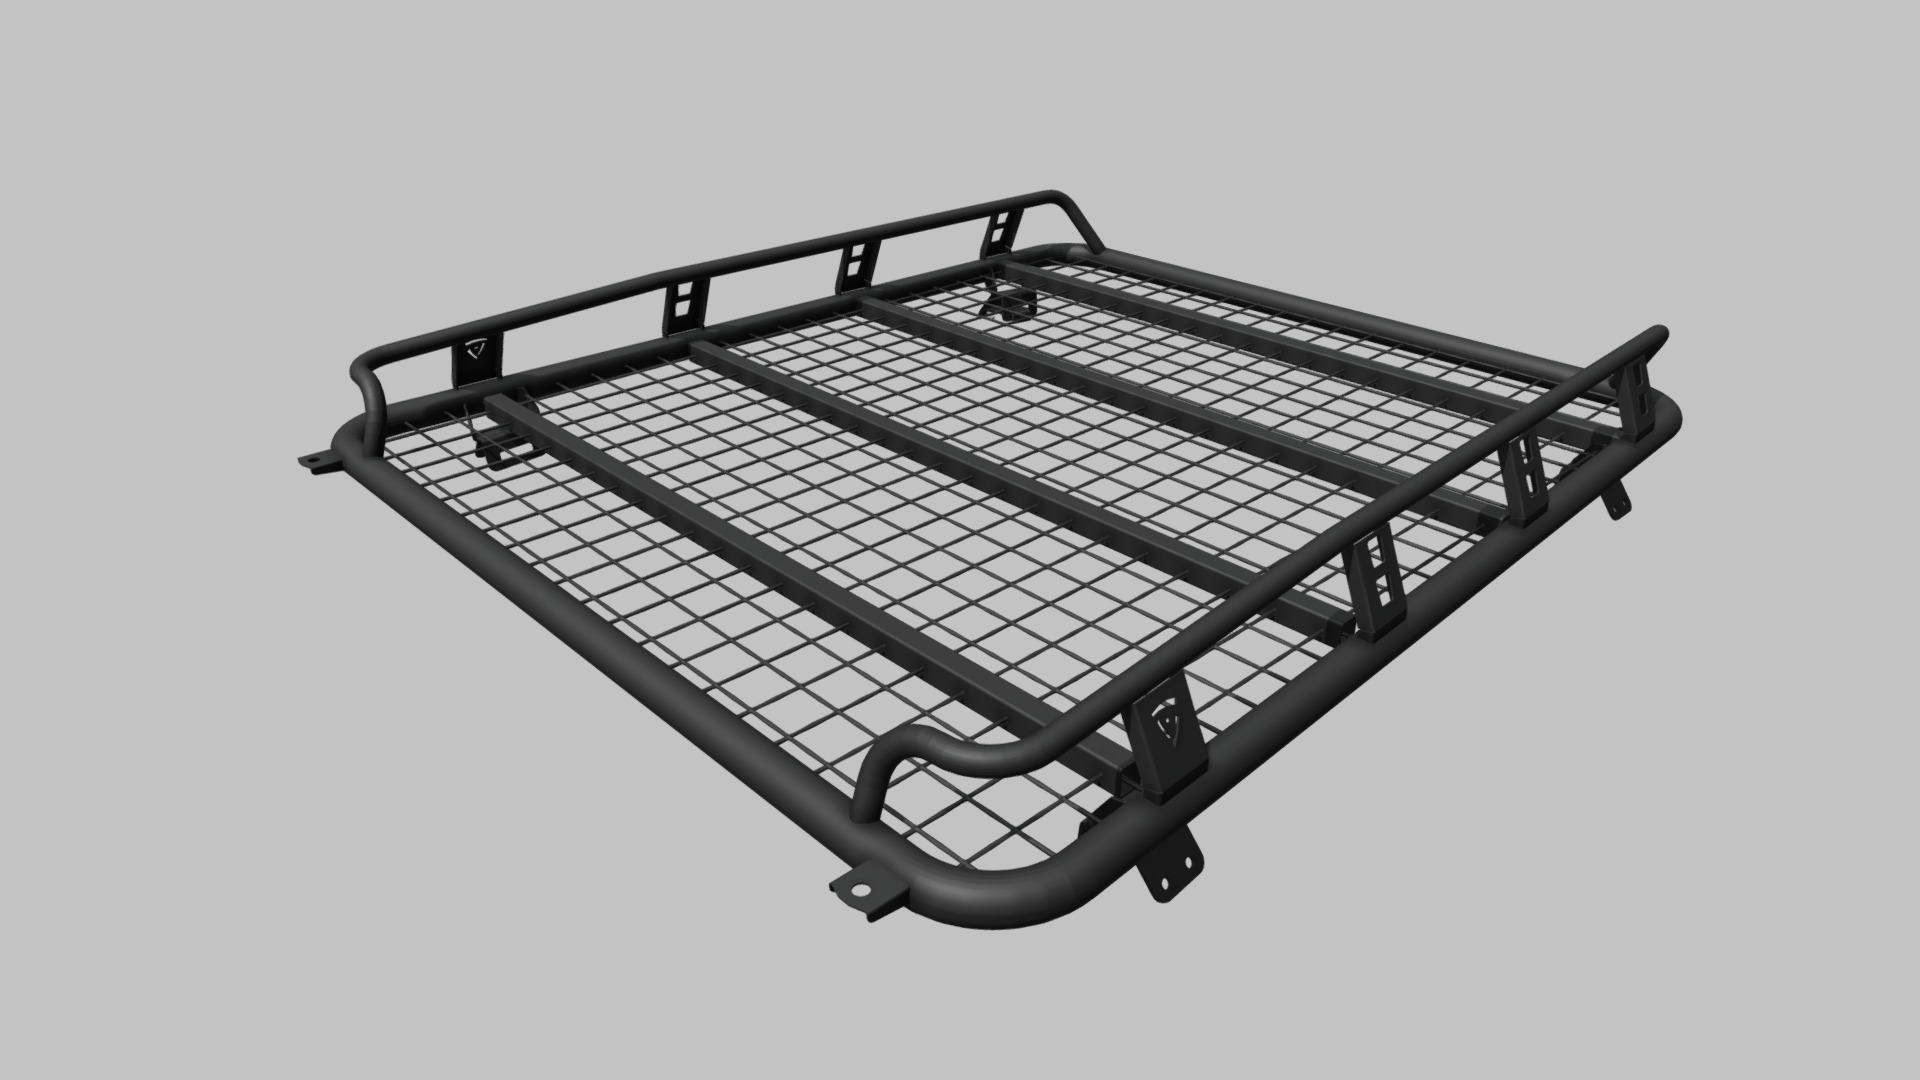 3D model Roof rack F-DESIGN Chevrolet Niva SE под бокс - This is a 3D model of the Roof rack F-DESIGN Chevrolet Niva SE под бокс. The 3D model is about a close-up of a rack.